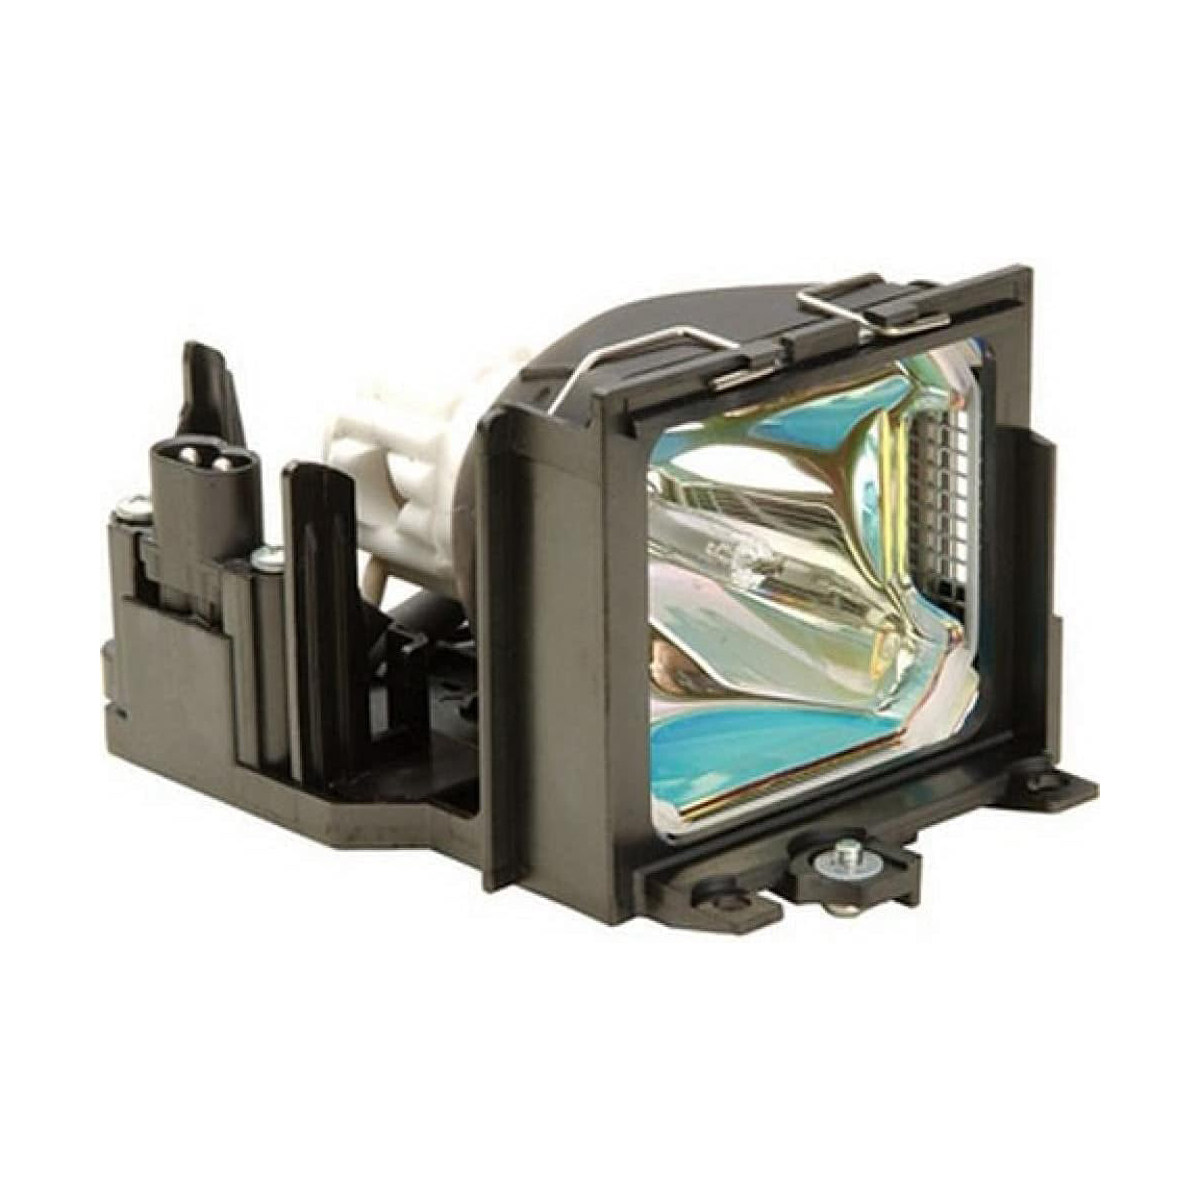 Replacement Projector lamp AN-A10LP For SHARP PG-A10S PG-A10X PG-A10S-SL